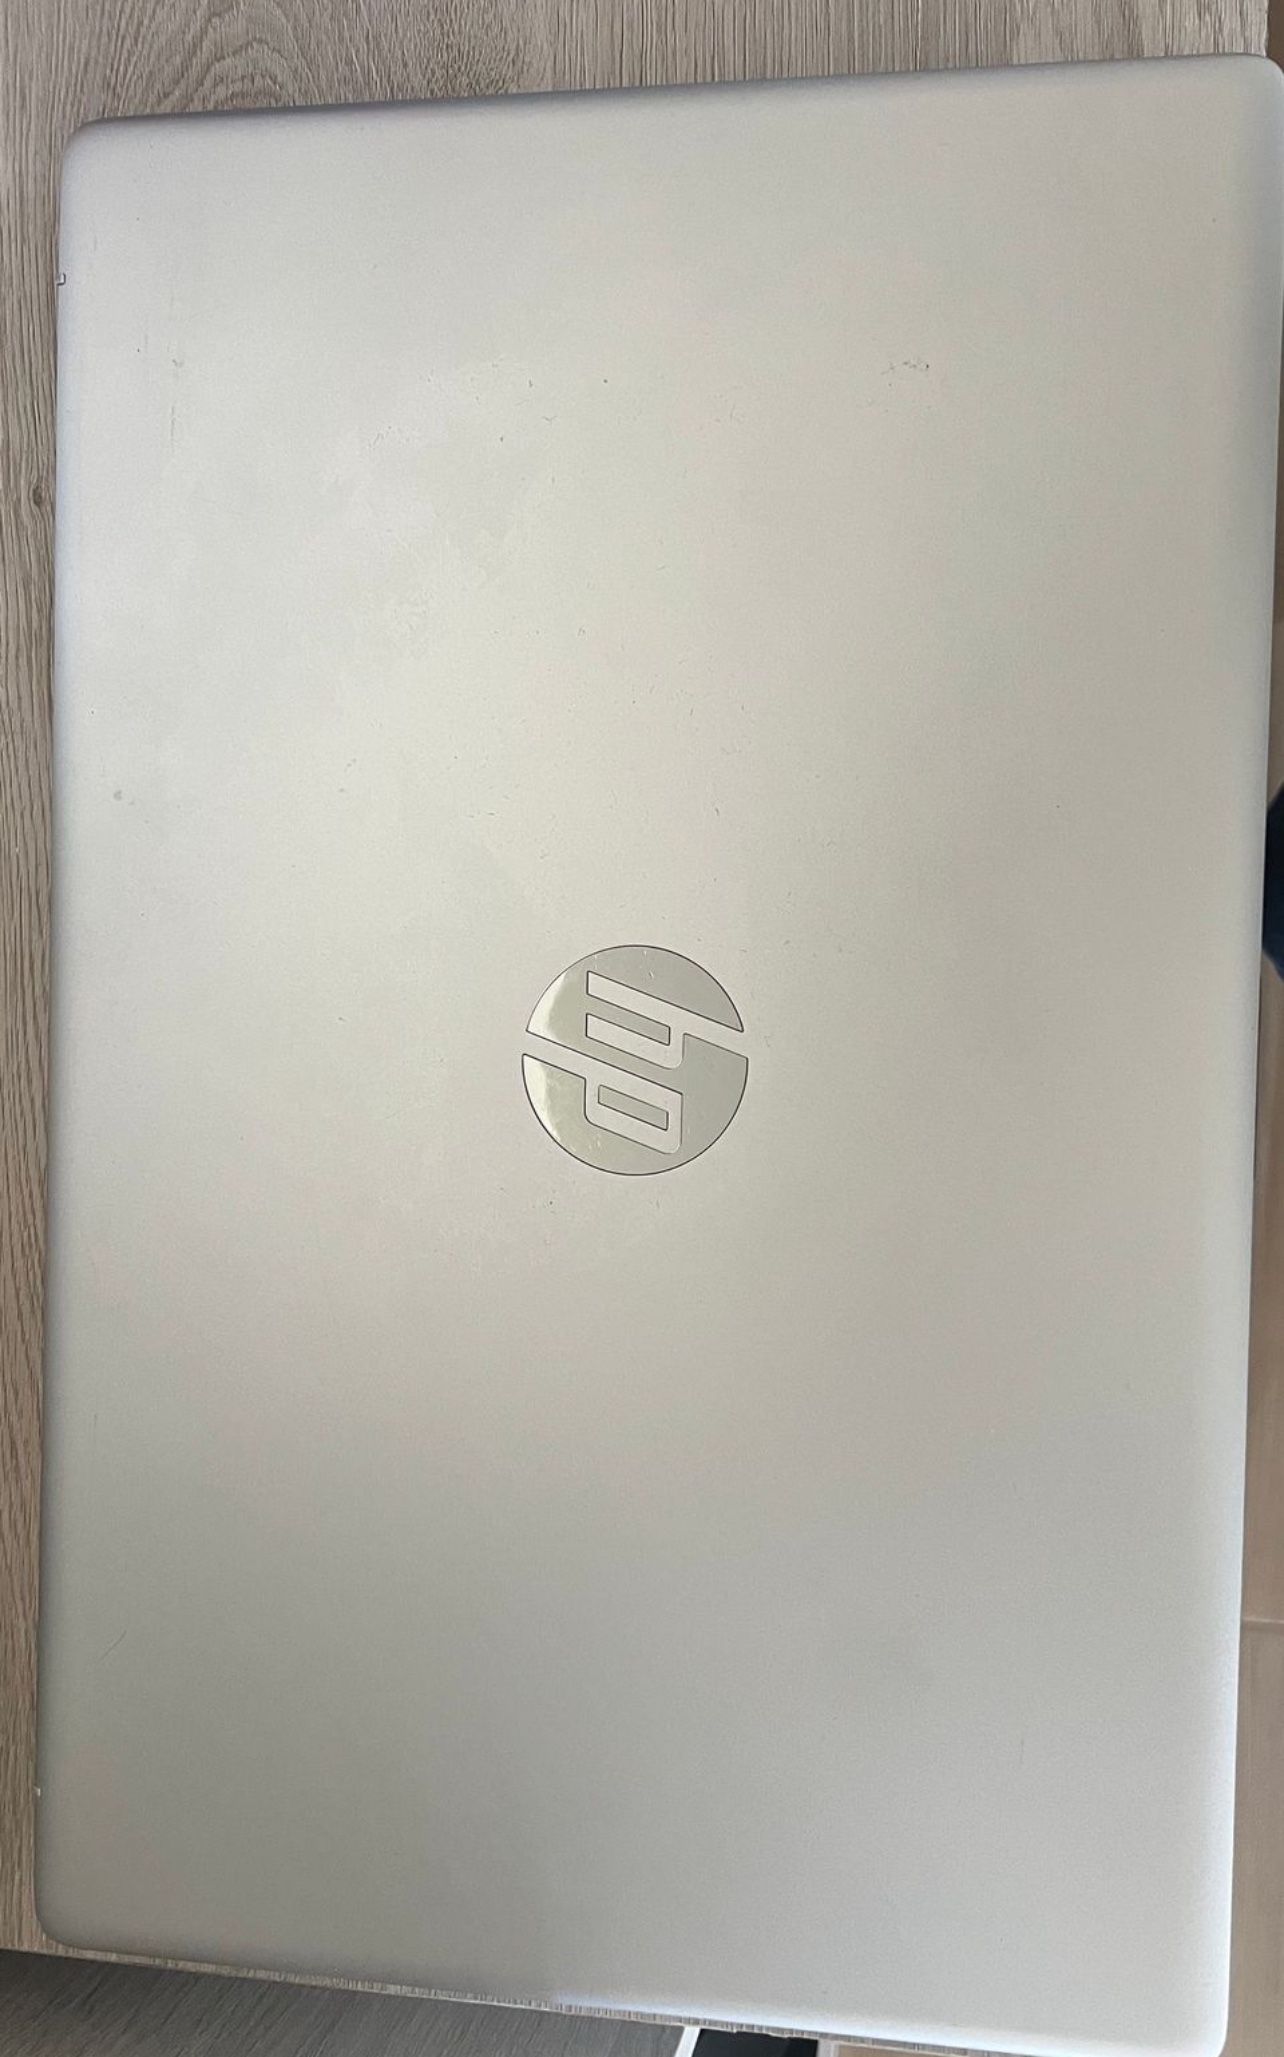 Gently Used HP Laptop For sale - $200 